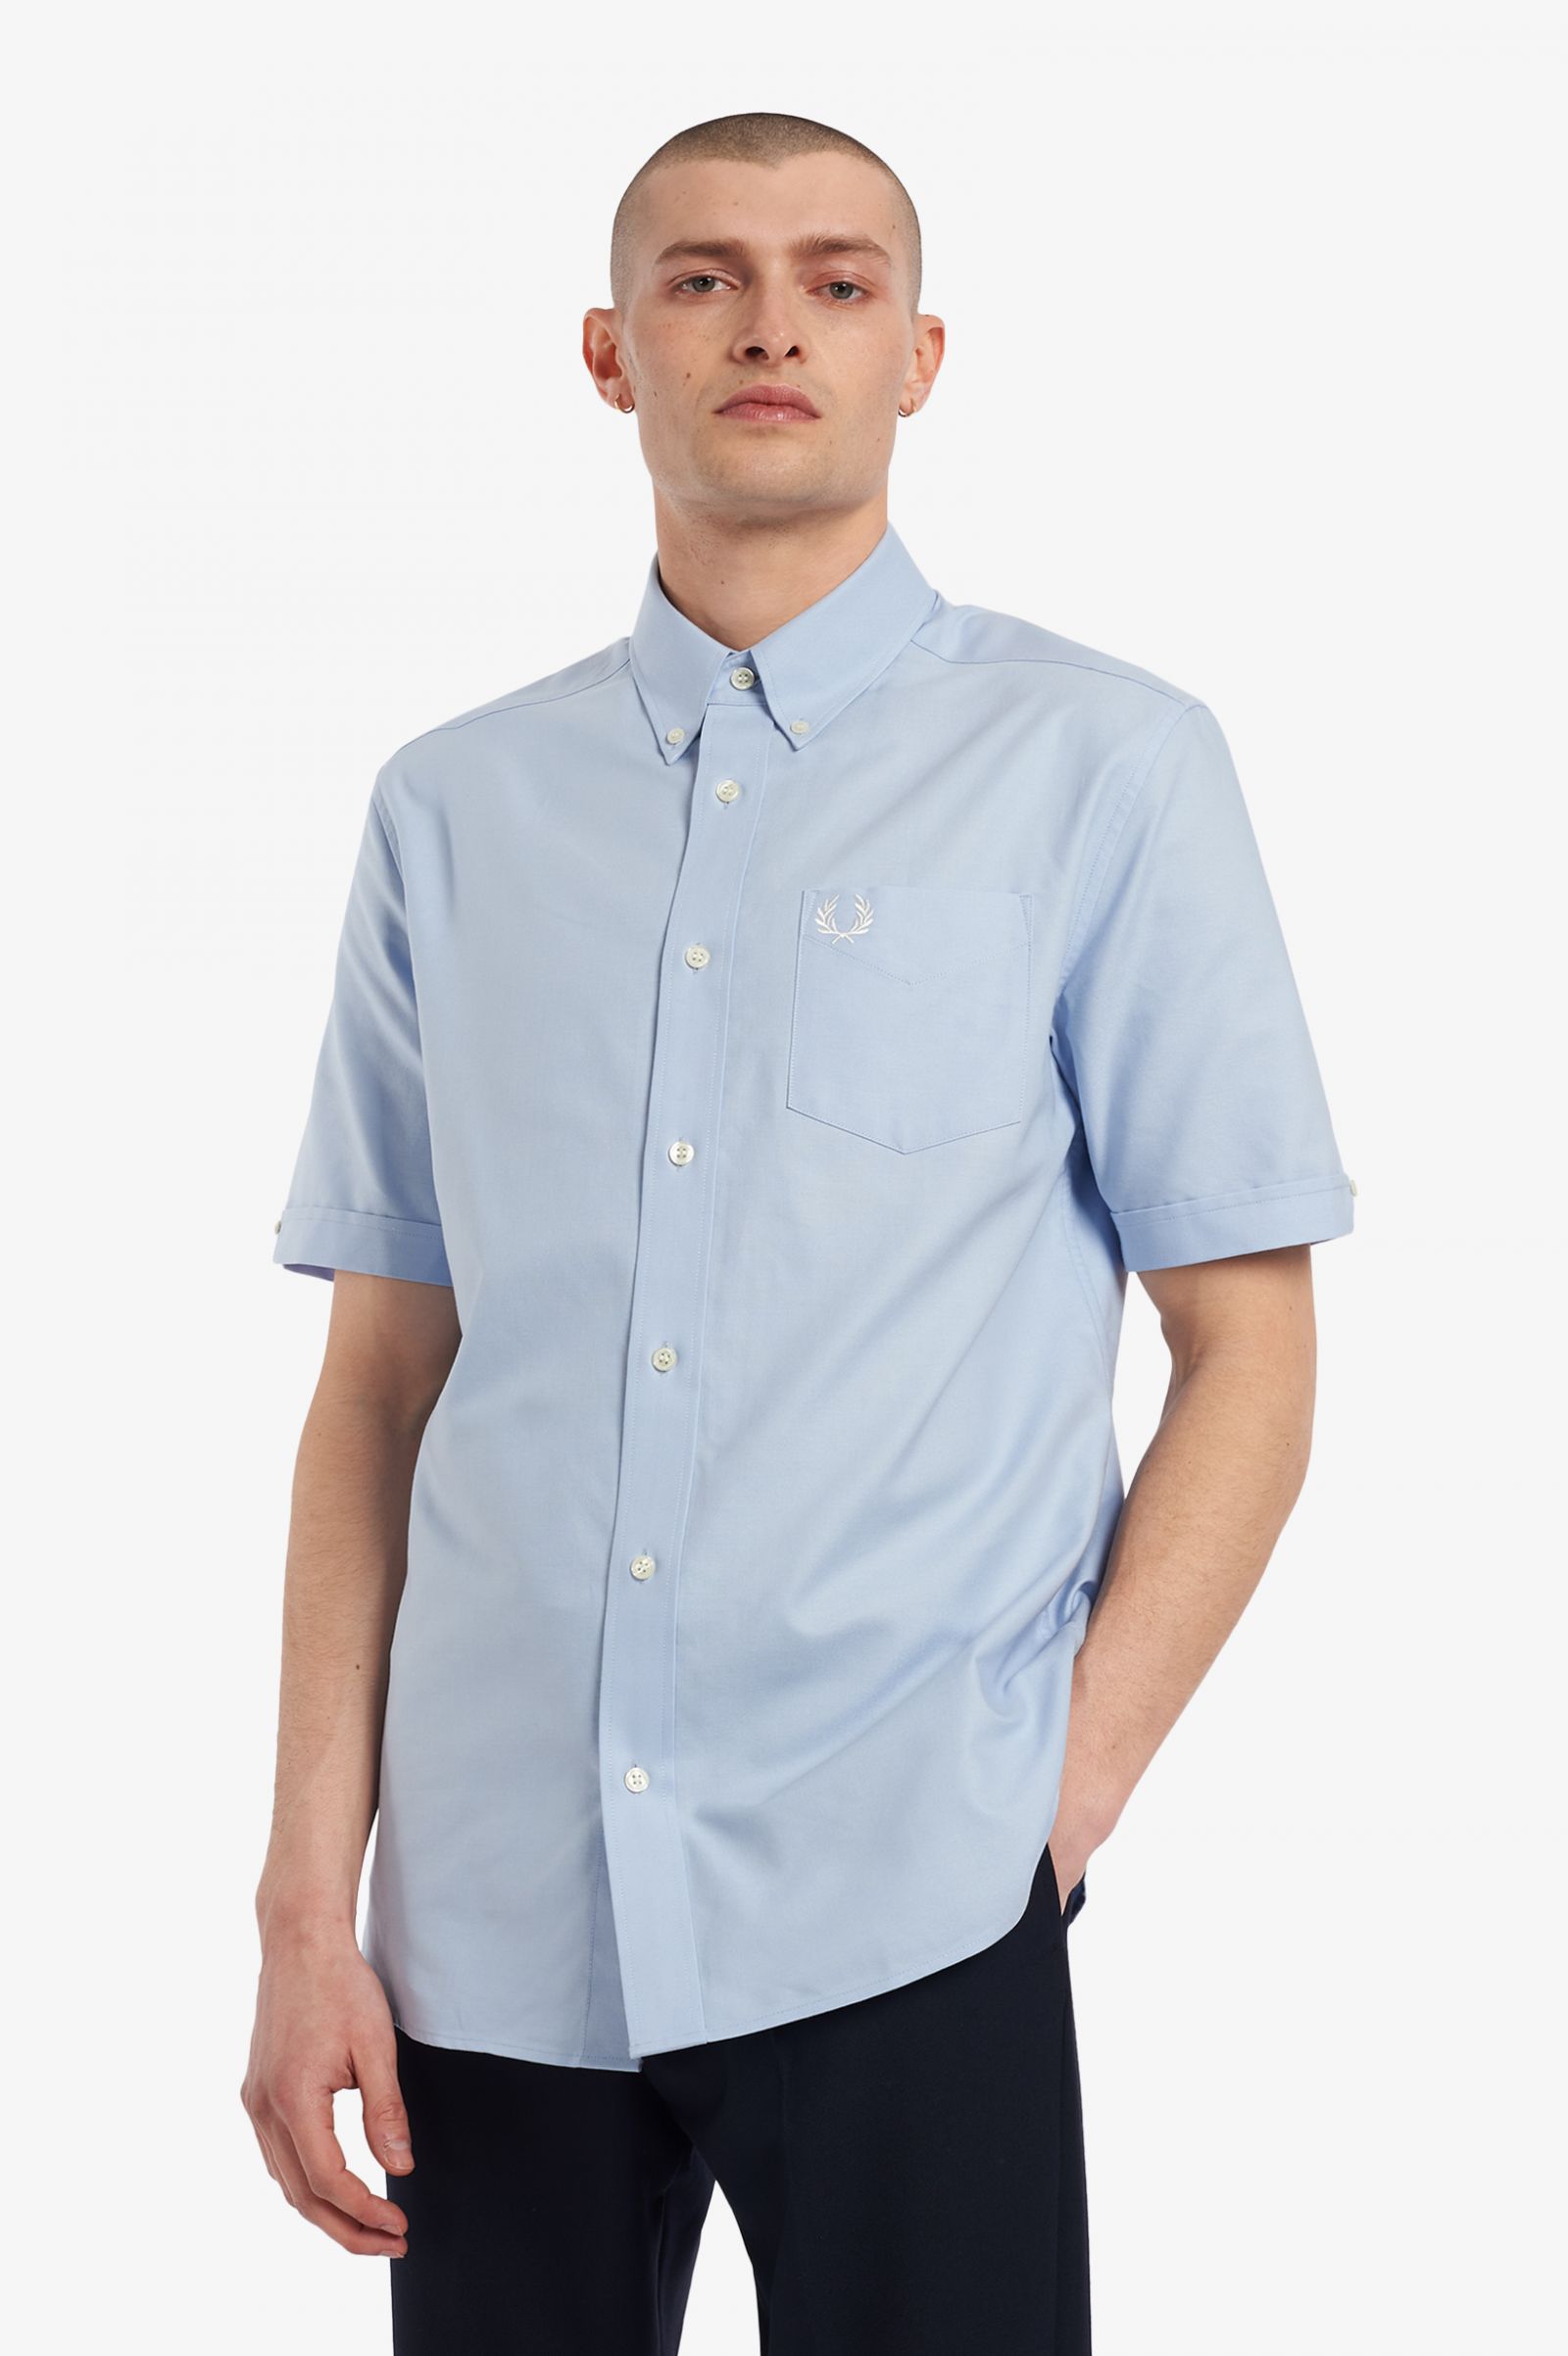 find Chemise Oxford Manches Courtes Homme Marque